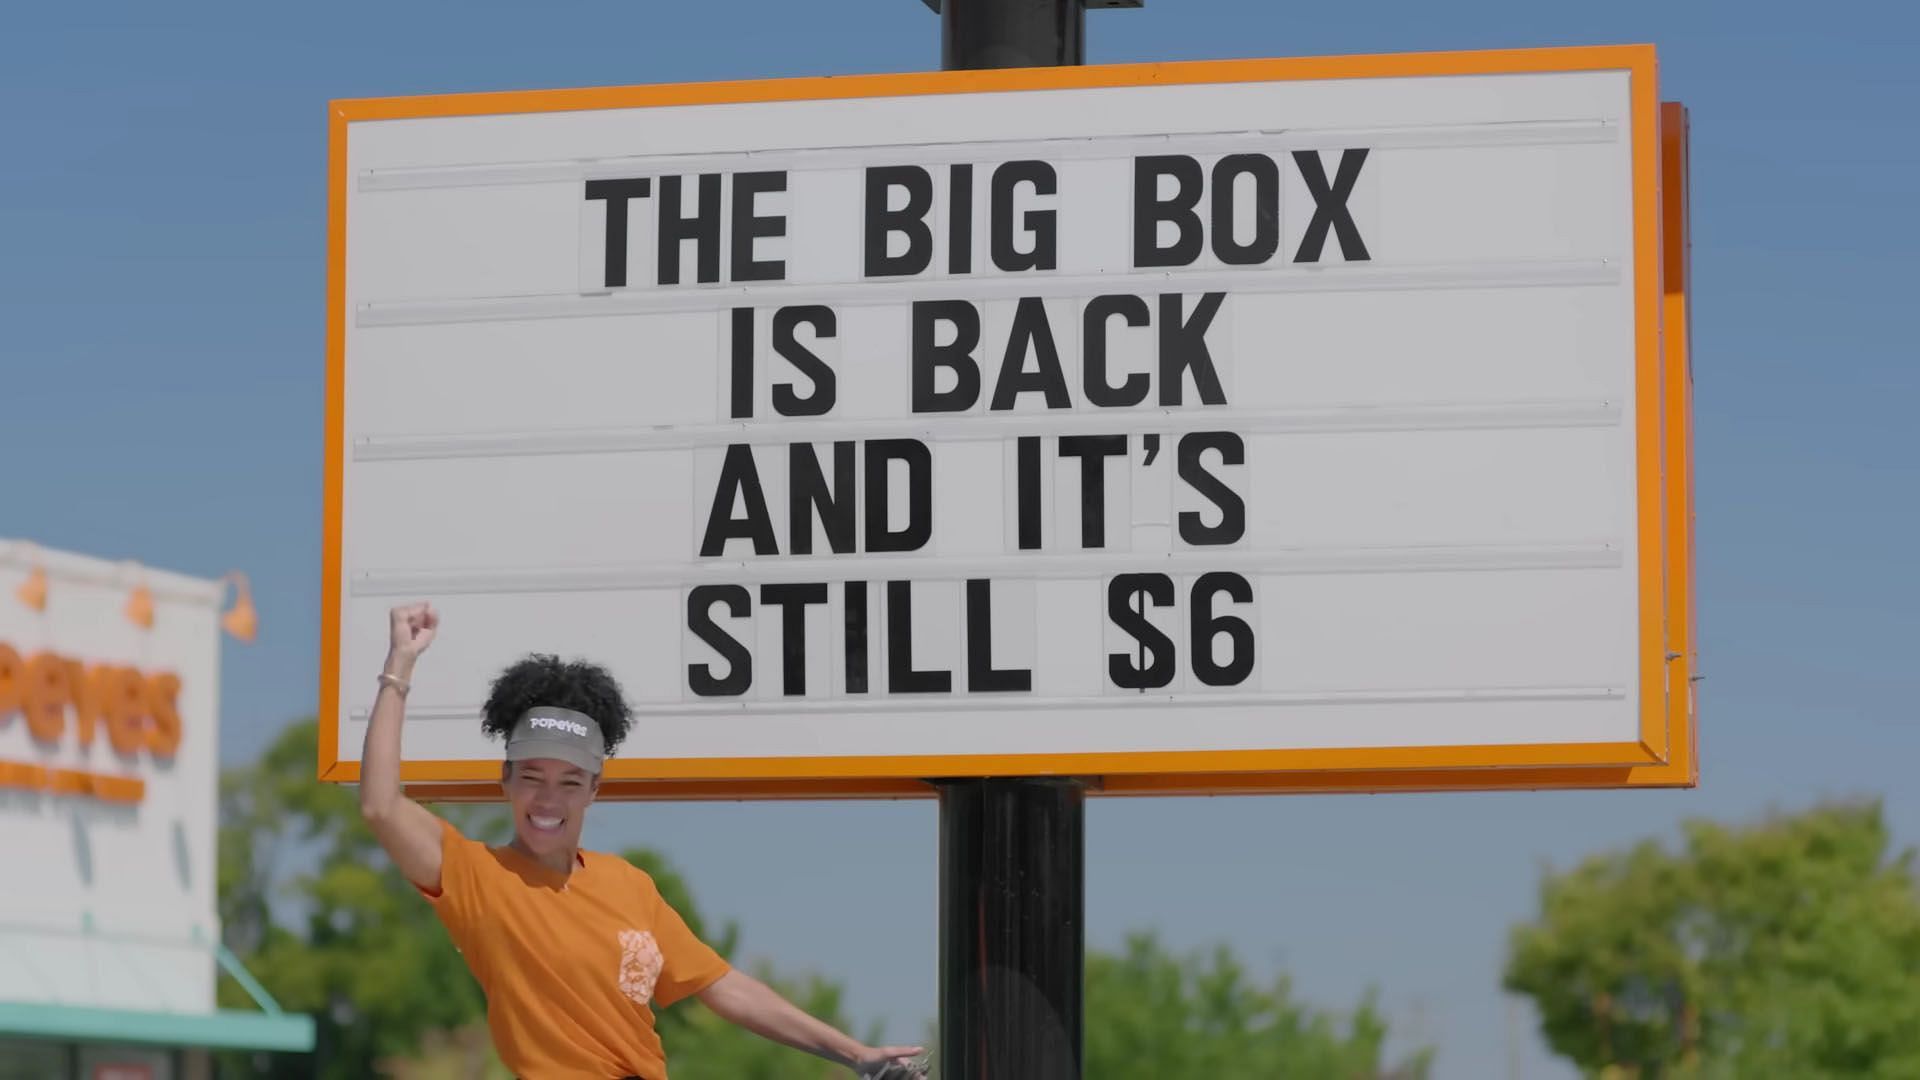 Promotional material for Big Box via YouTube/@popeyes